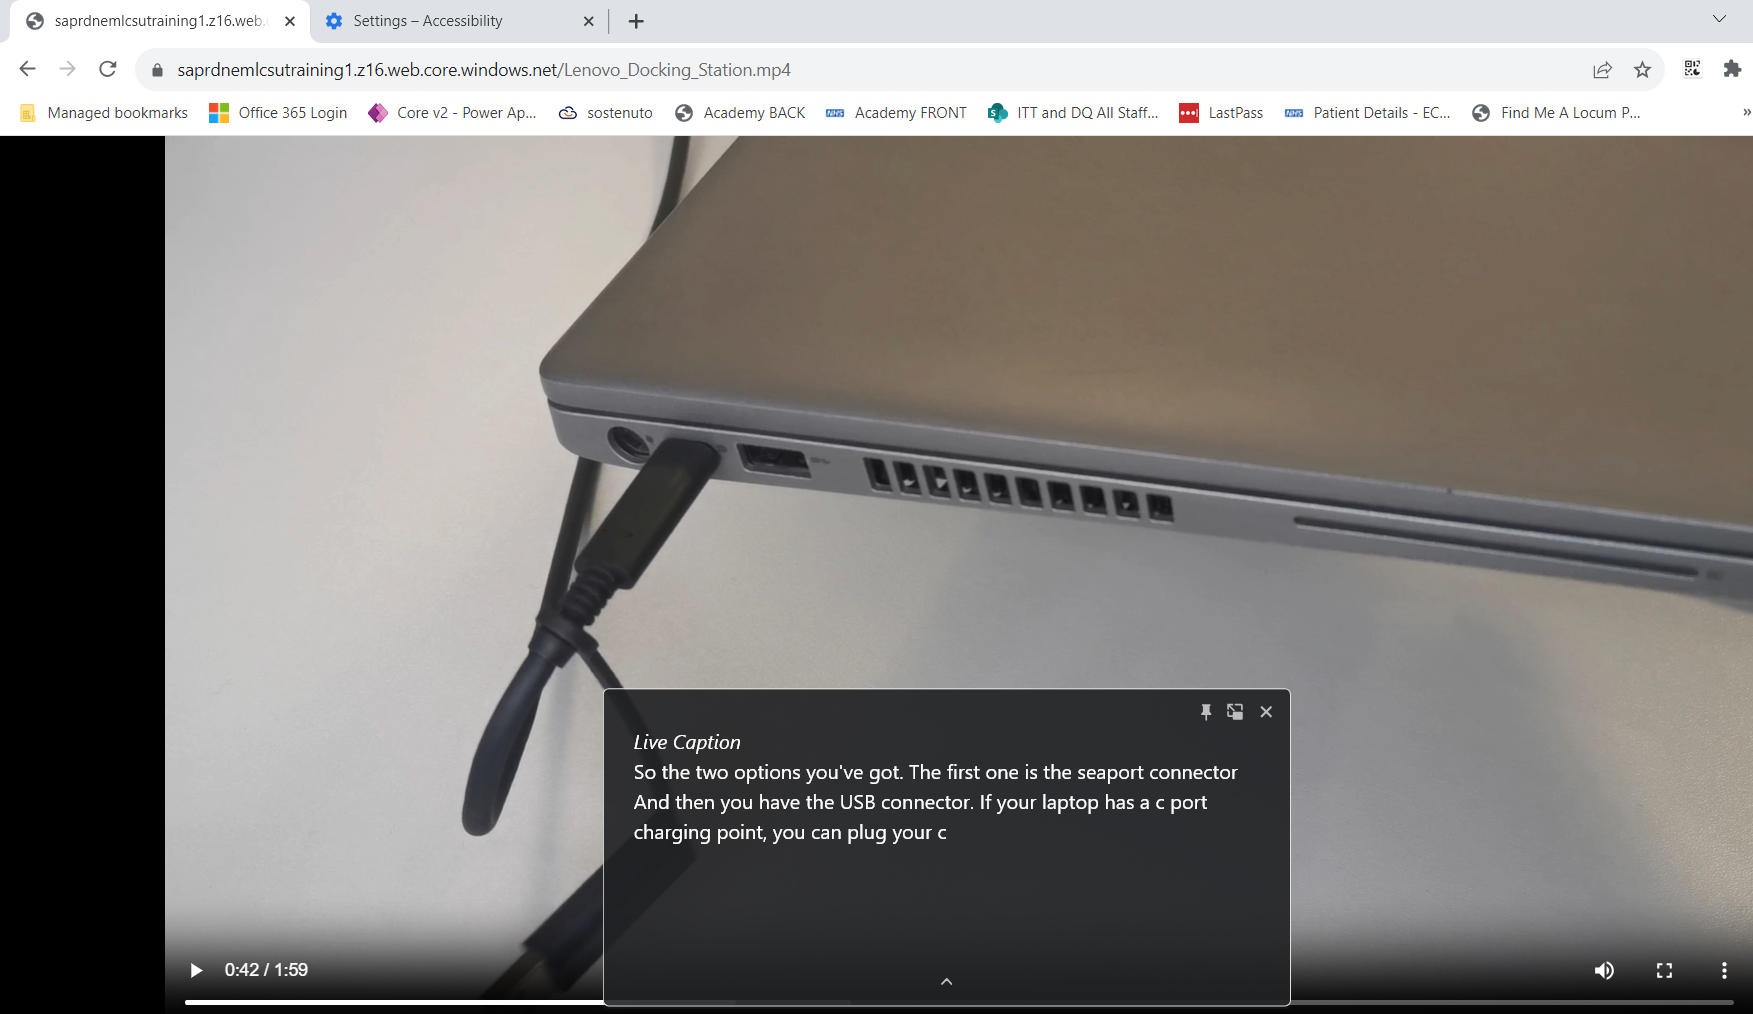 Screenshot of Live Captions appearing as white text on a black background on a video